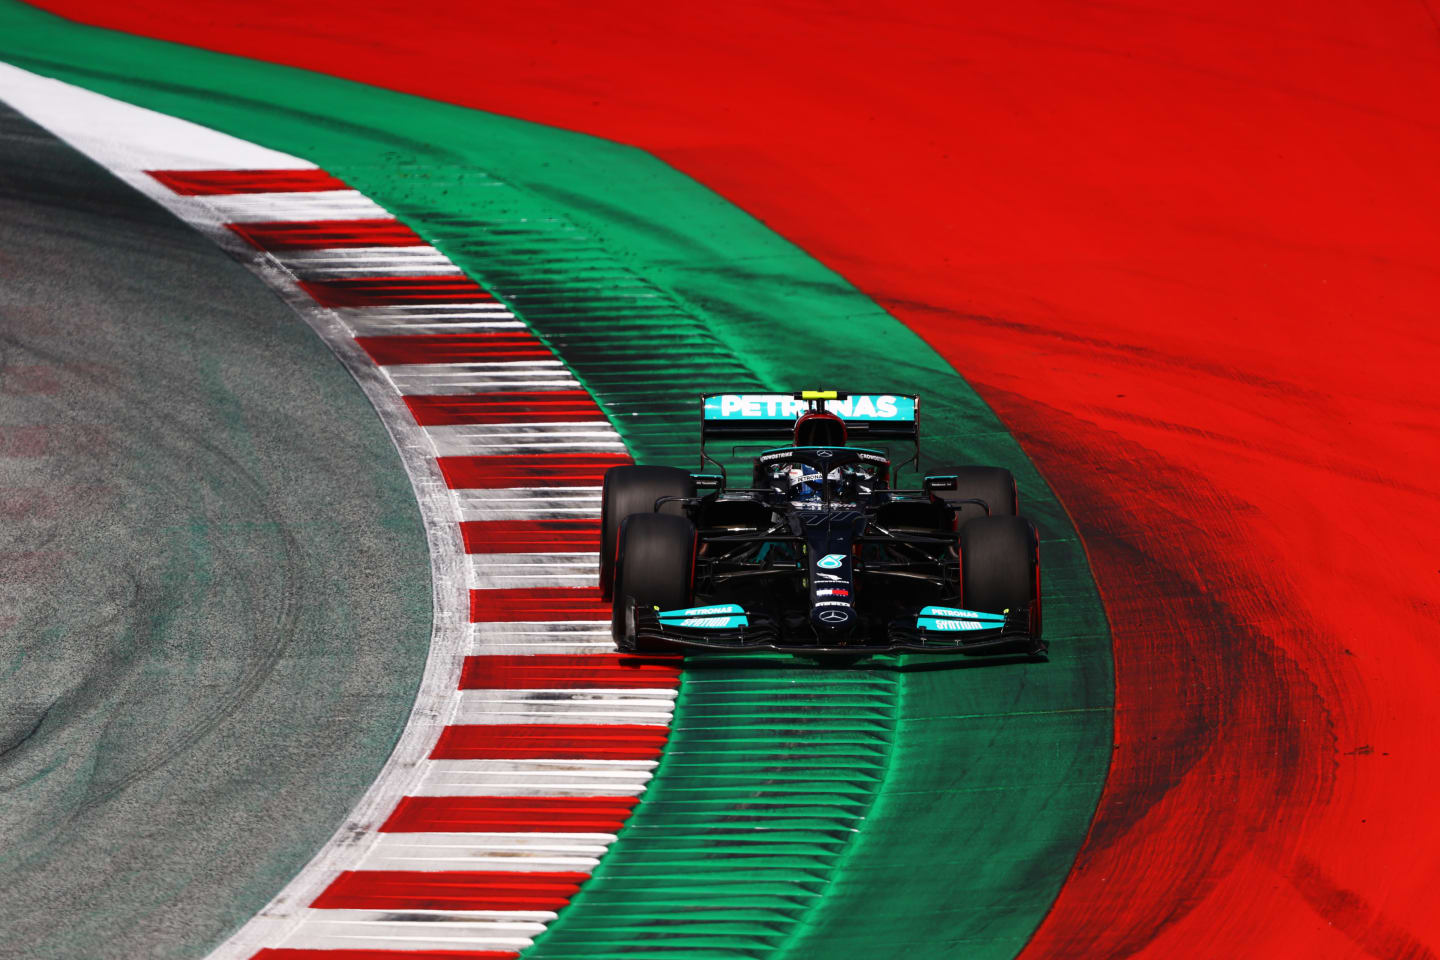 SPIELBERG, AUSTRIA - JULY 03: Valtteri Bottas of Finland driving the (77) Mercedes AMG Petronas F1 Team Mercedes W12 during qualifying ahead of the F1 Grand Prix of Austria at Red Bull Ring on July 03, 2021 in Spielberg, Austria. (Photo by Bryn Lennon/Getty Images)